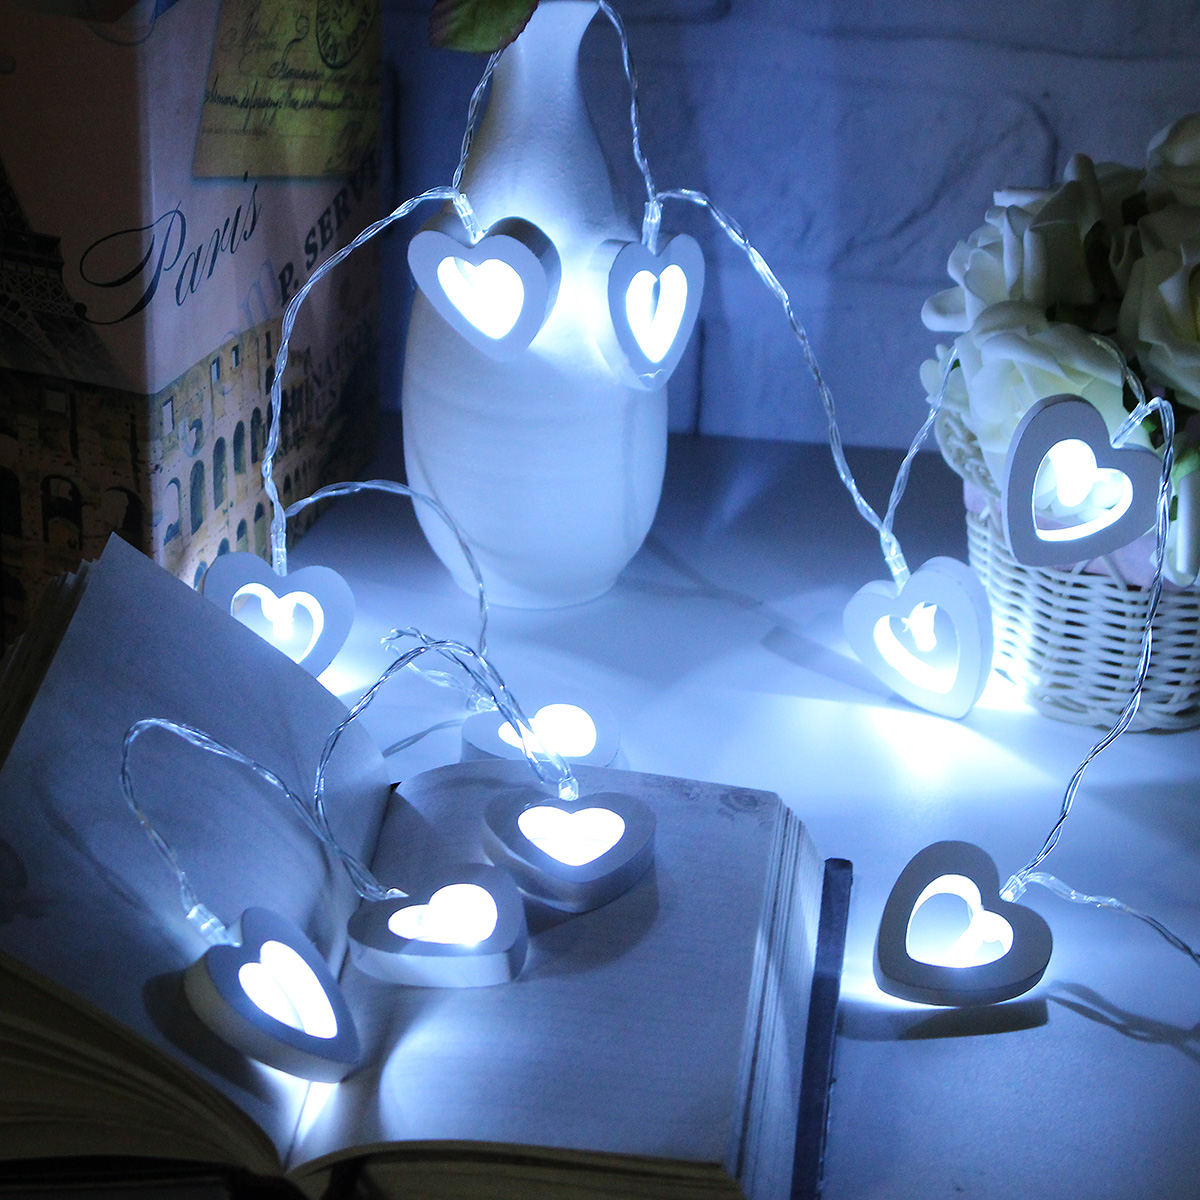 18M-03W-Wooden-Heart-Shape-Battery-Powered-10LED-Fairy-String-Light-for-Christmas-Home-Party-Decor-D-1630337-8